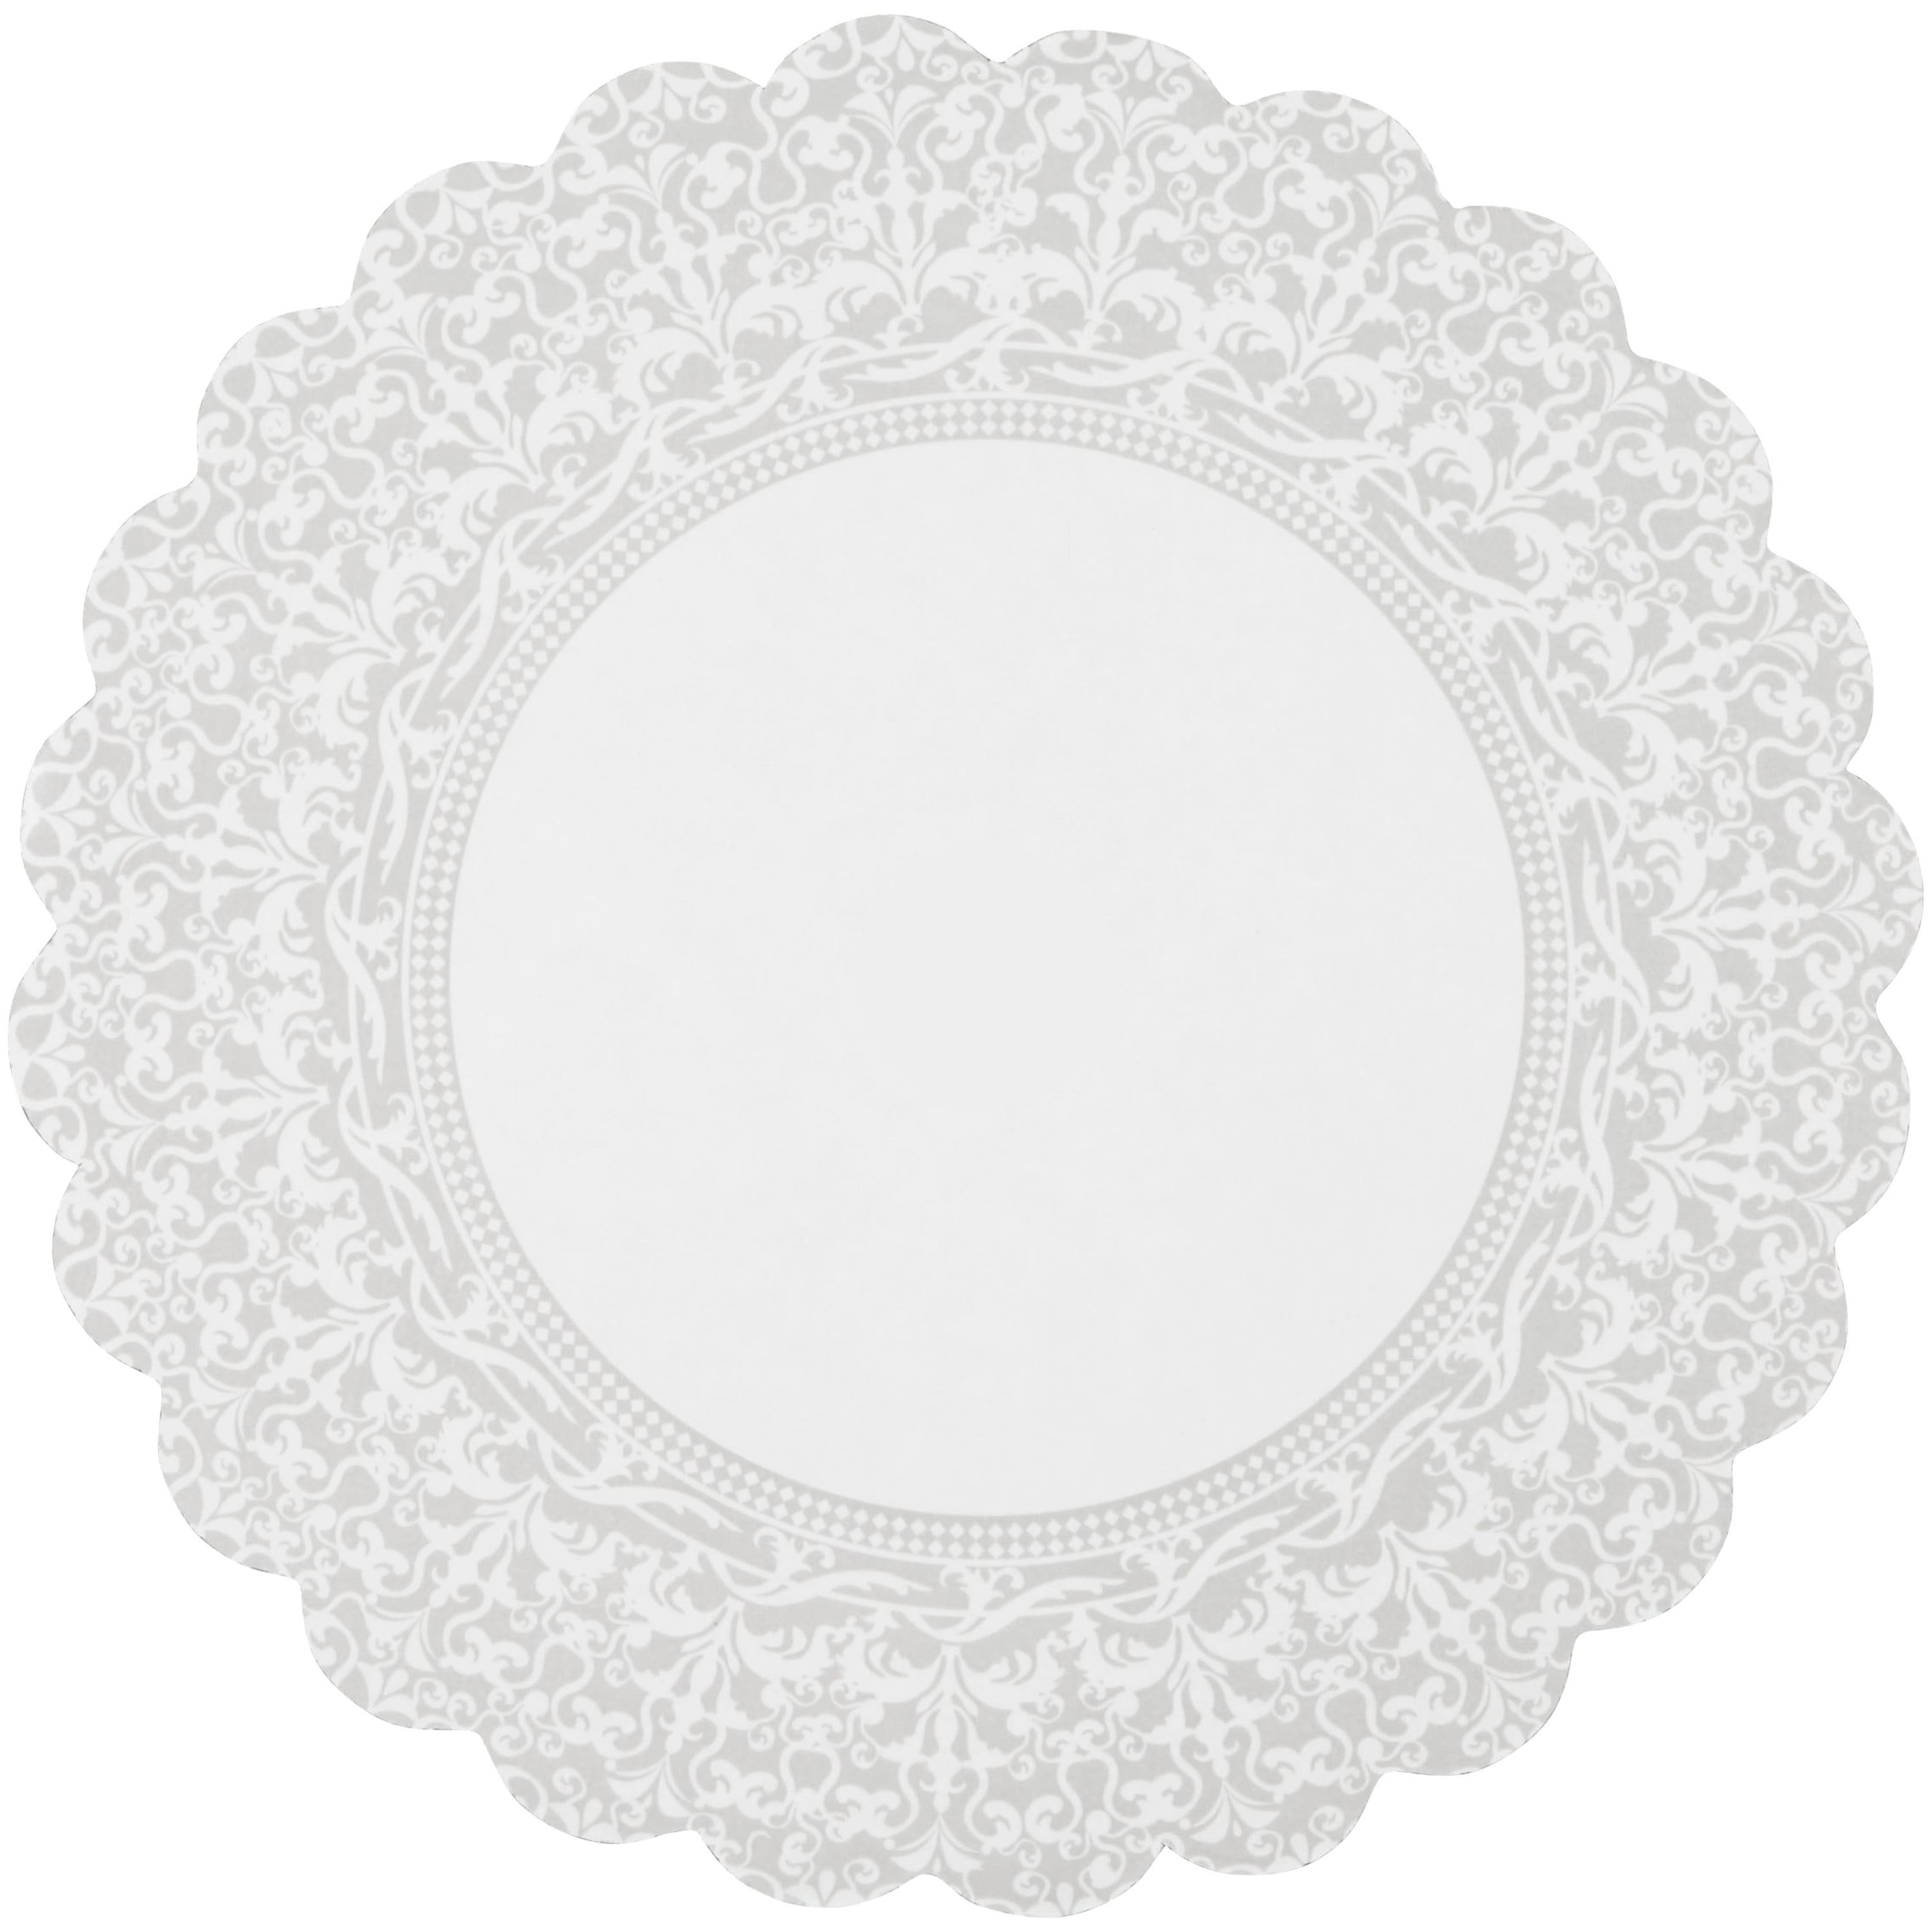 36 Assorted Paper Doilies White Catering Party Table Decoration 3 Sizes UK 